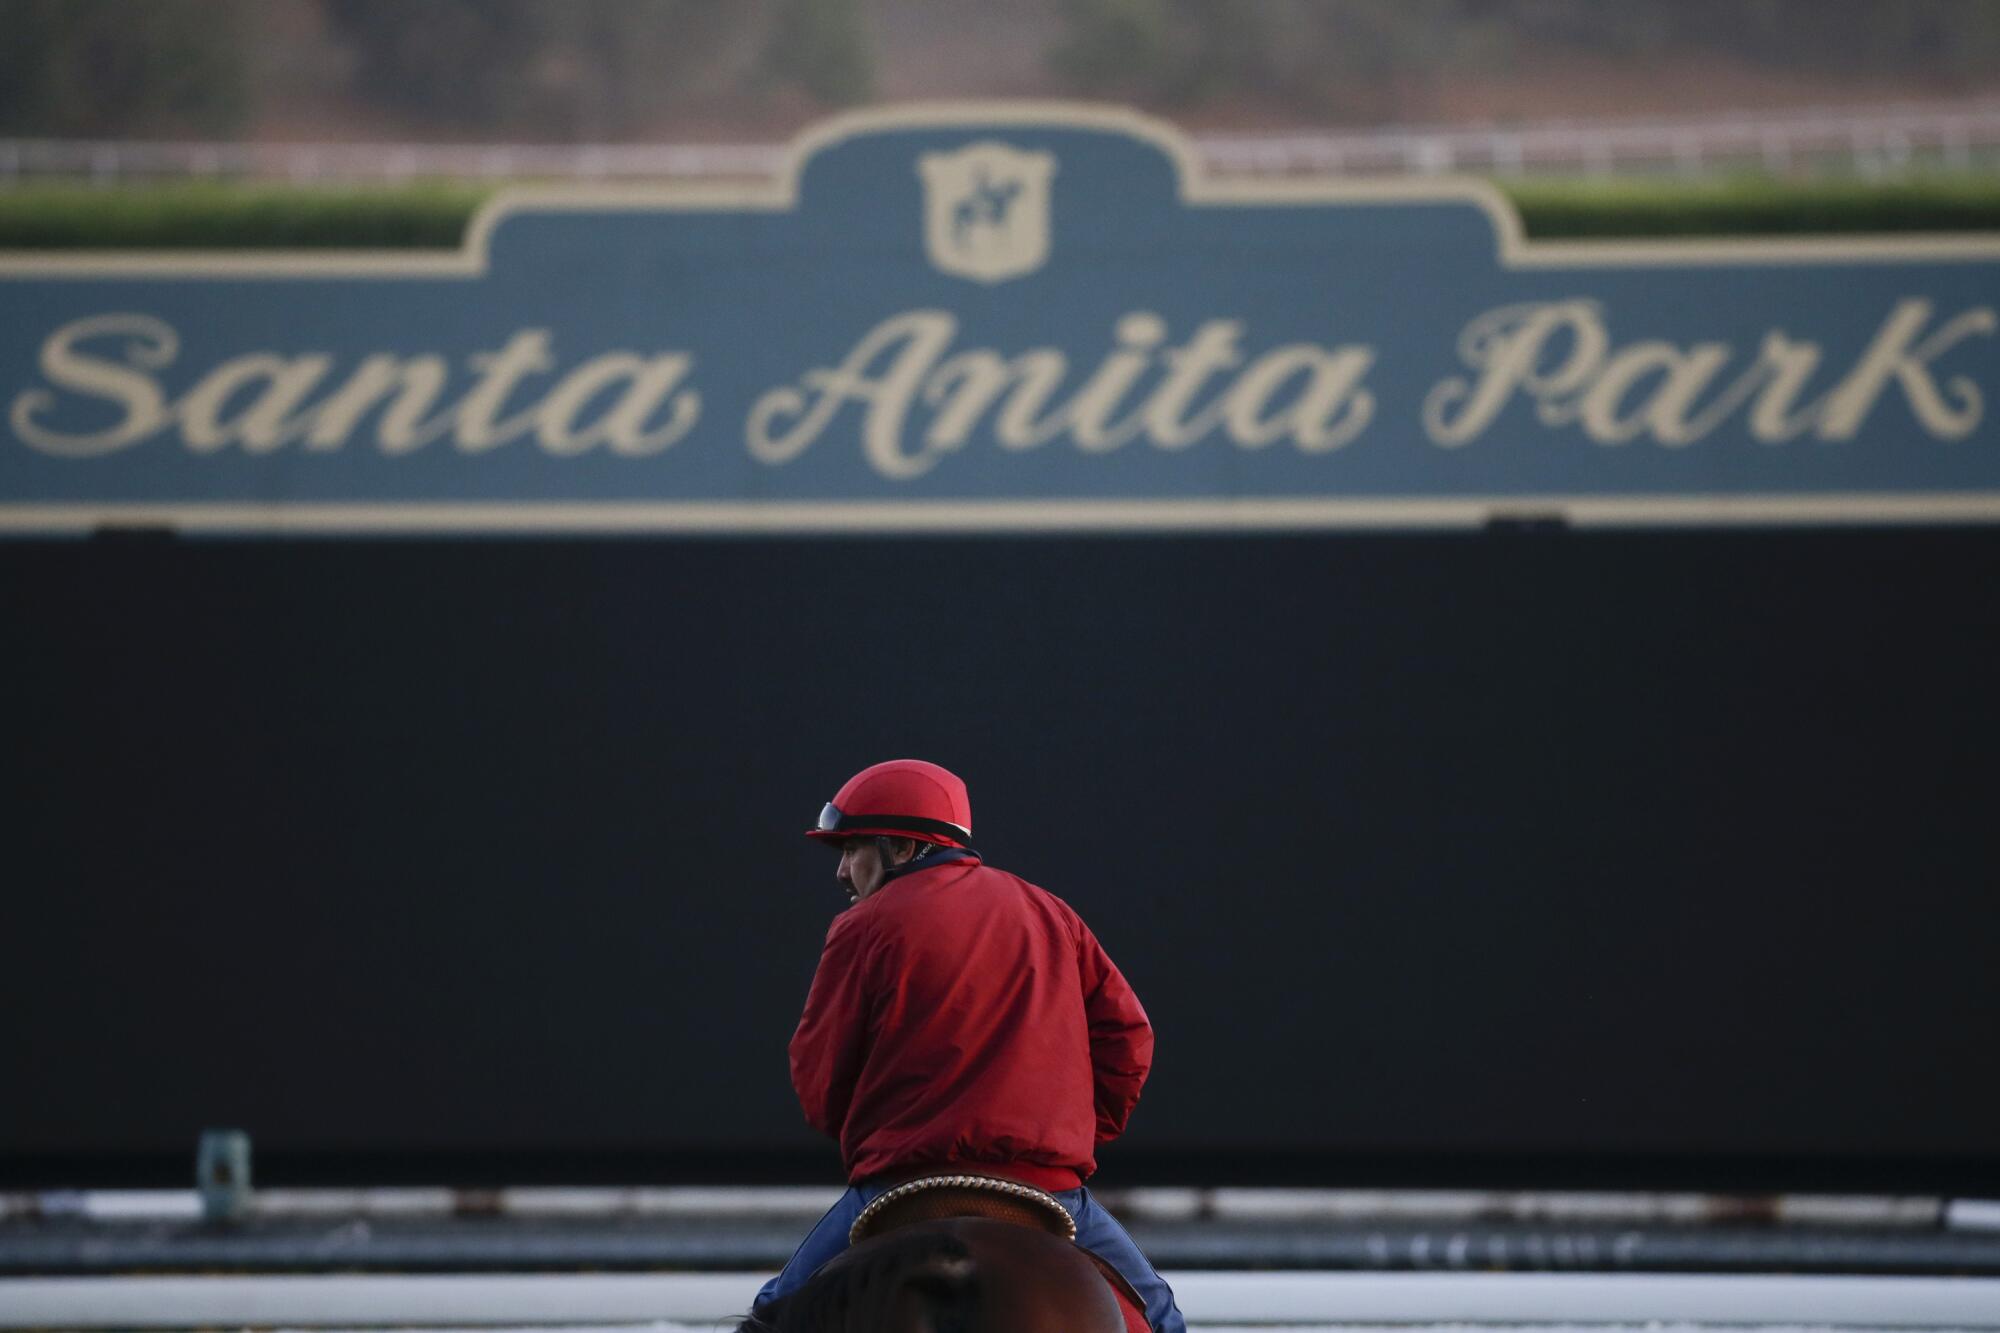 An outrider waits by the track as horses train for the Breeders' Cup races at Santa Anita Park in 2014.